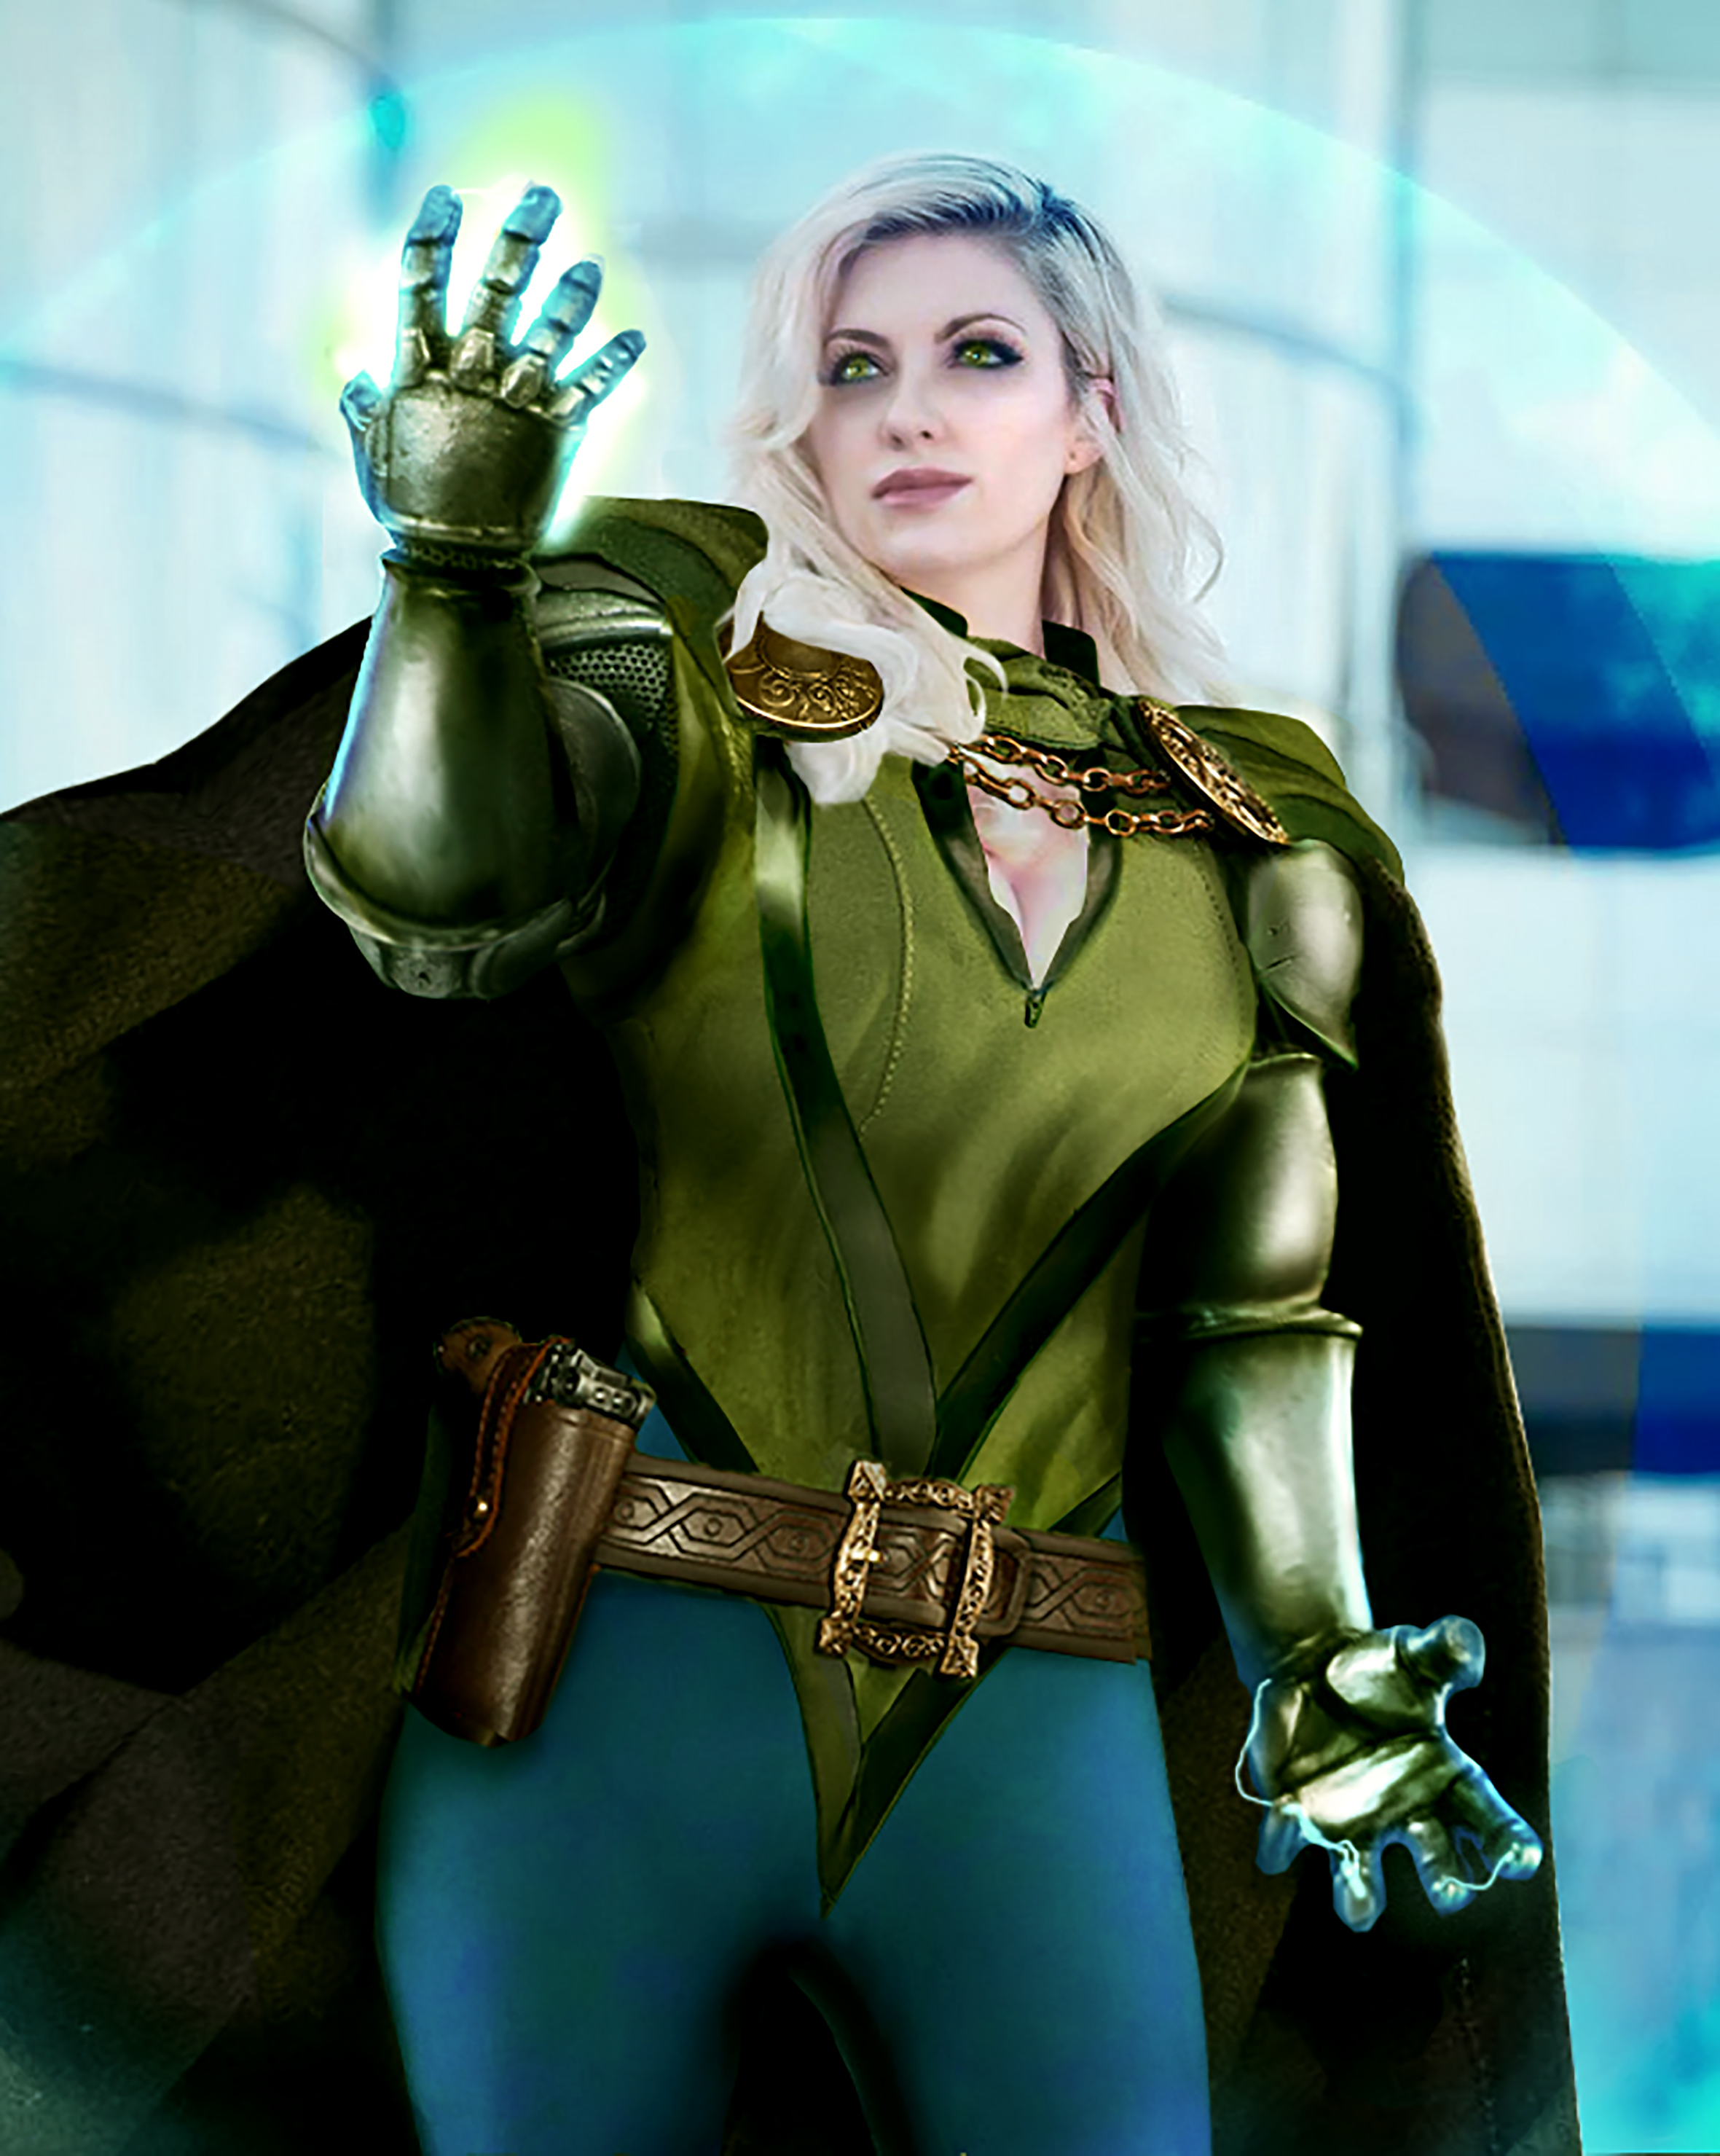 Doctor Doom - Invisible Woman body possession TG by AmyBlake92 on ...